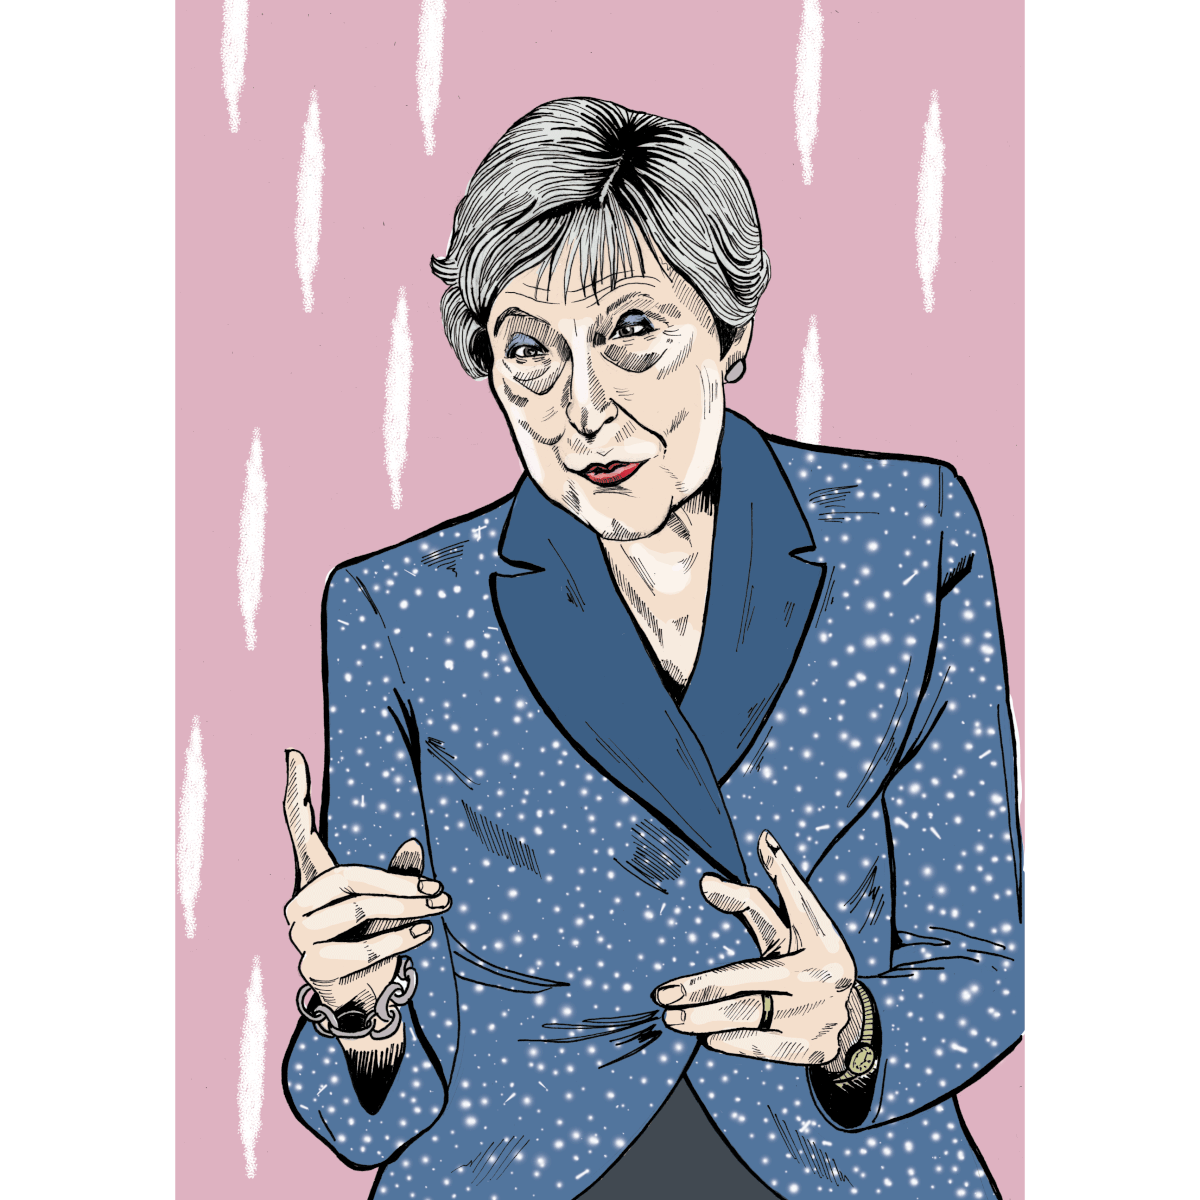 GIFs Teresa May Dances - 18 Animated Pictures For Free!